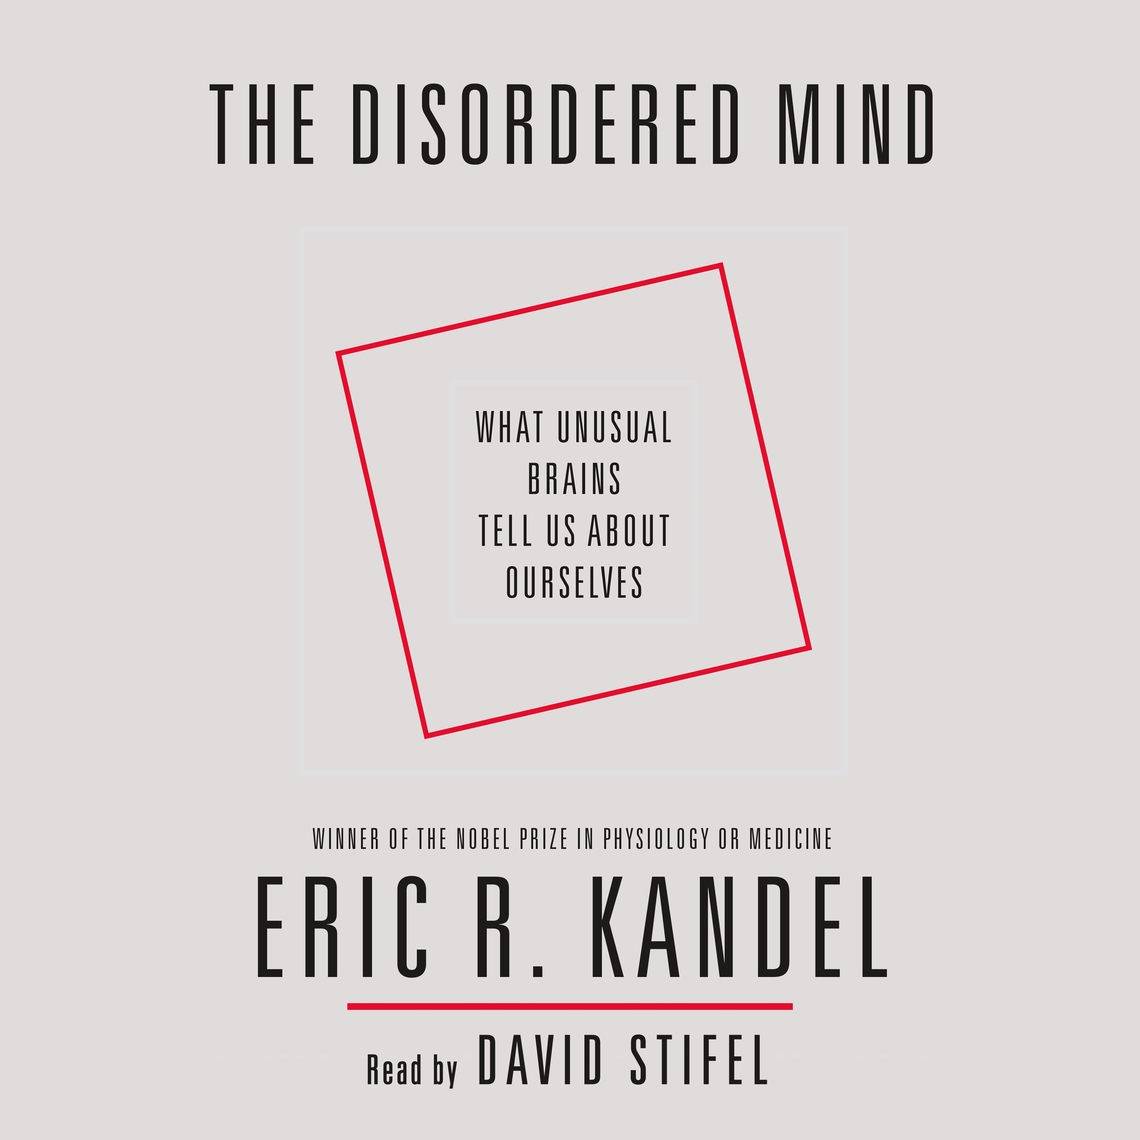 The Disordered Mind by Eric R. Kandel (Audiobook) - Read free for 30 days